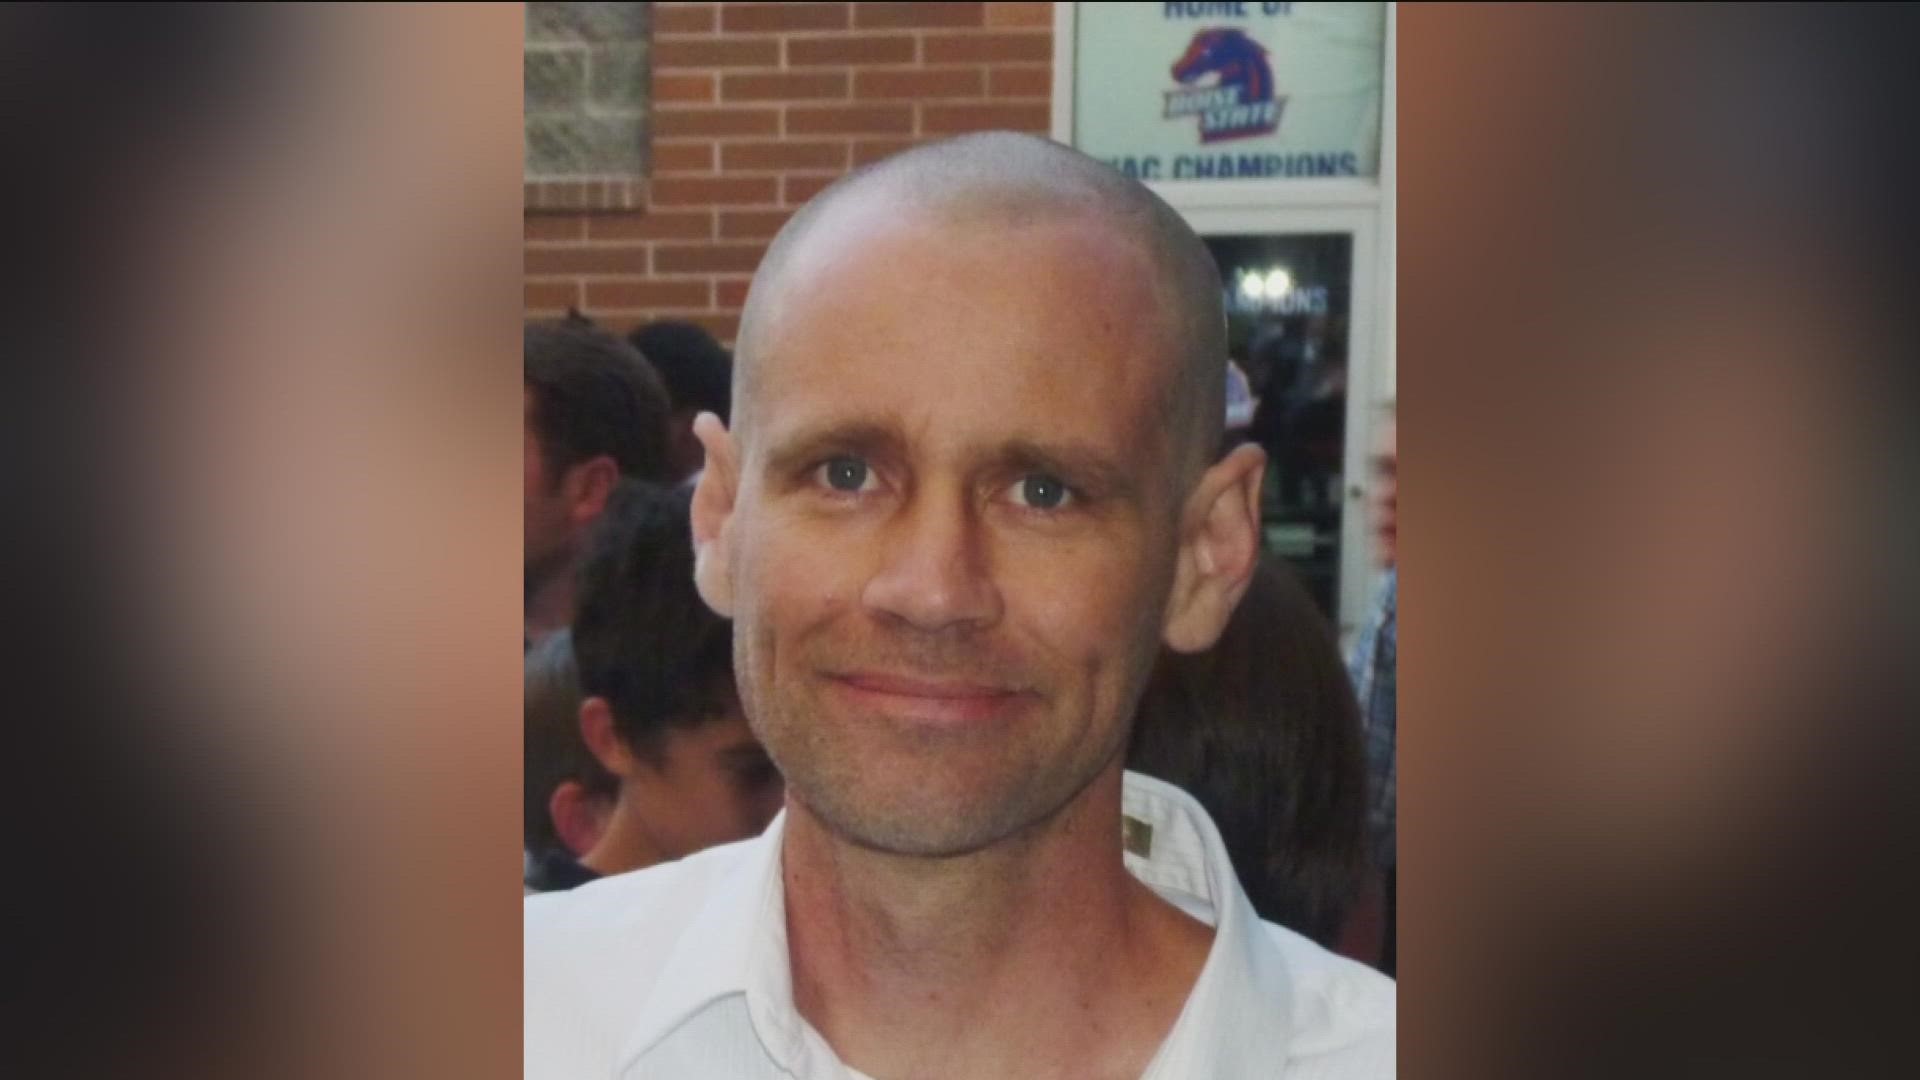 Firefighters in Arizona came across a backpack later discovered to be that of David Alford, who has been missing from Boise since 2014.